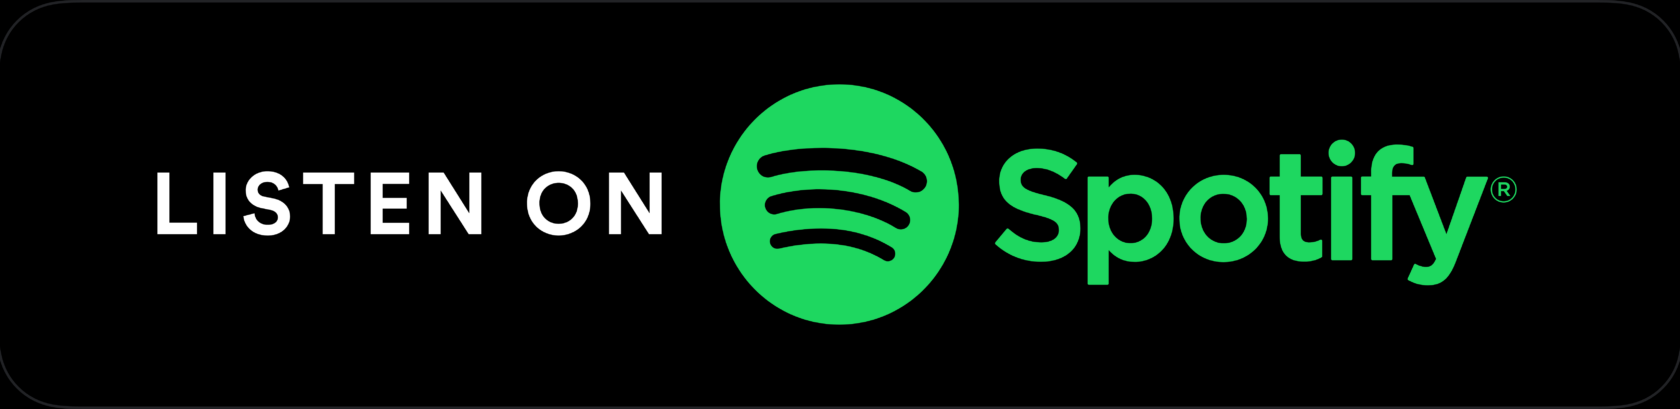 Spotify_Color on Blank